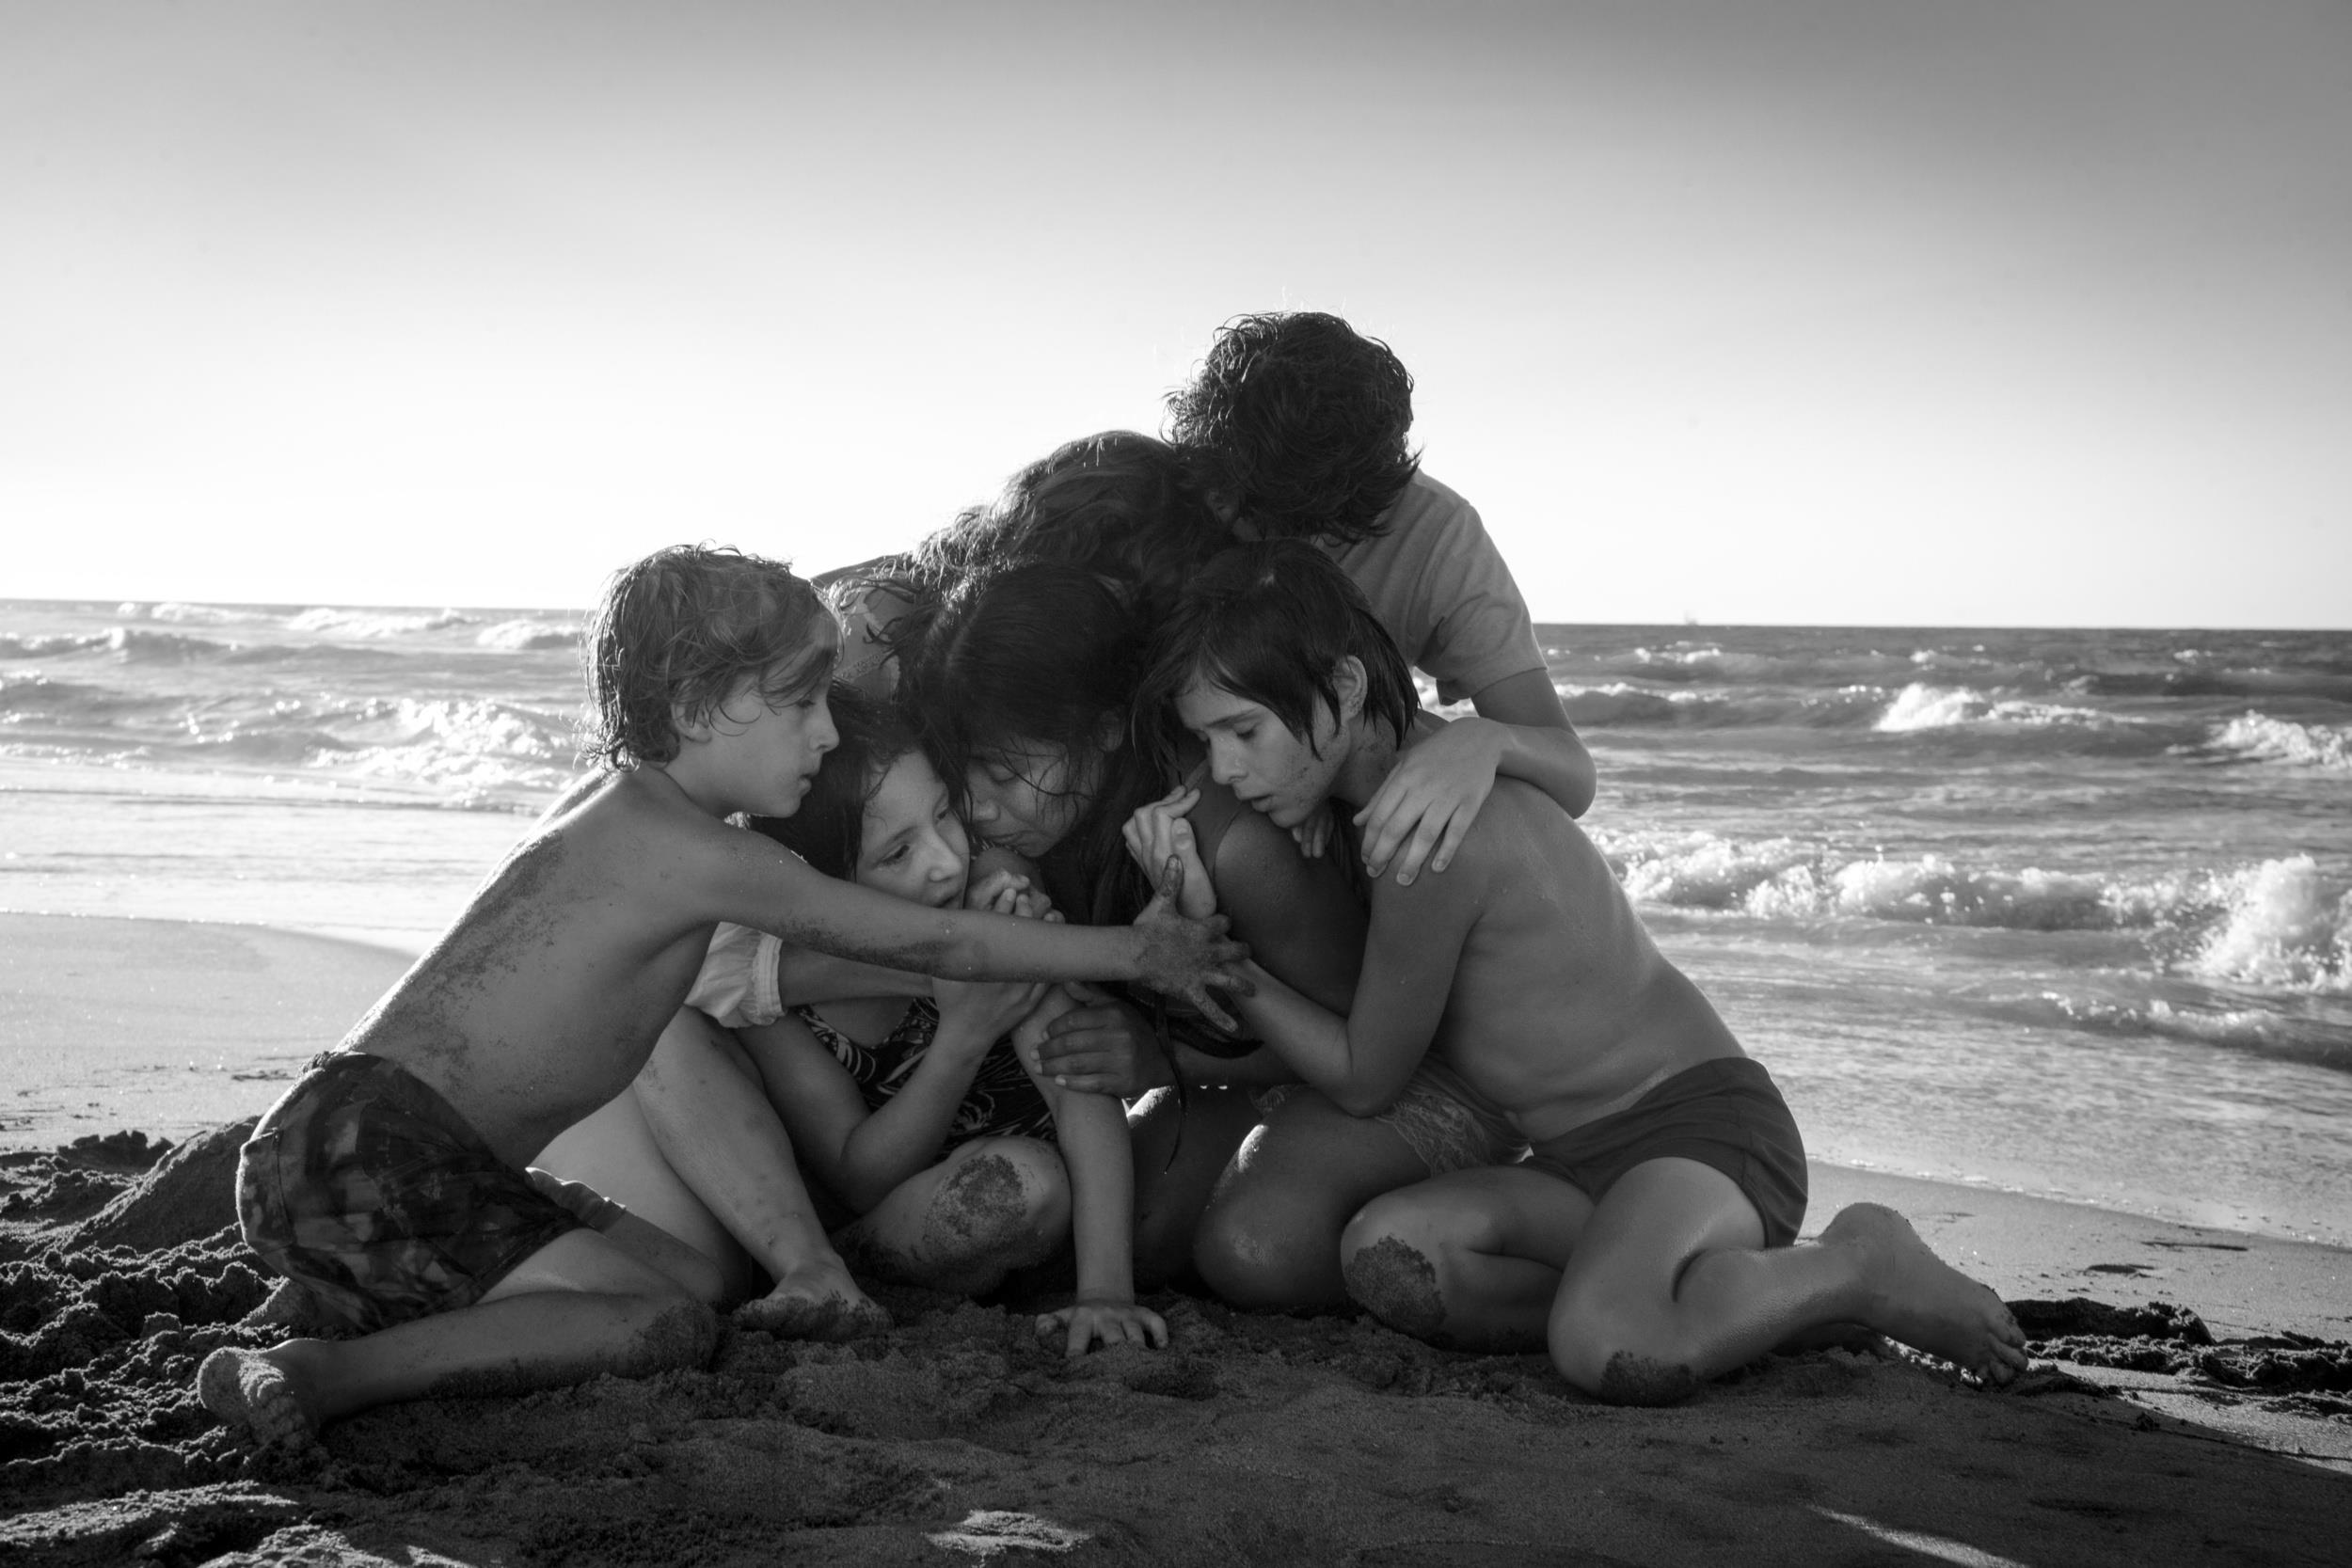 <p>Another Netflix original that did extremely well at the Oscars is Alfonso Cuarón’s sprawling drama <em>Roma</em>, based on the filmmaker’s childhood in 1970s Mexico. The story follows Cleo, a maid who works for a middle-class family and looks after their four children. Featuring stunning black-and-white cinematography, Cuarón’s film is highly personal and moving. It is not only an incredibly meticulous recreation of time and place but makes the mundane completely mesmerizing. </p><p>You may also like: <a href='https://www.yardbarker.com/entertainment/articles/the_best_tv_shows_that_lasted_only_one_season_122723/s1__29844374'>The best TV shows that lasted only one season</a></p>